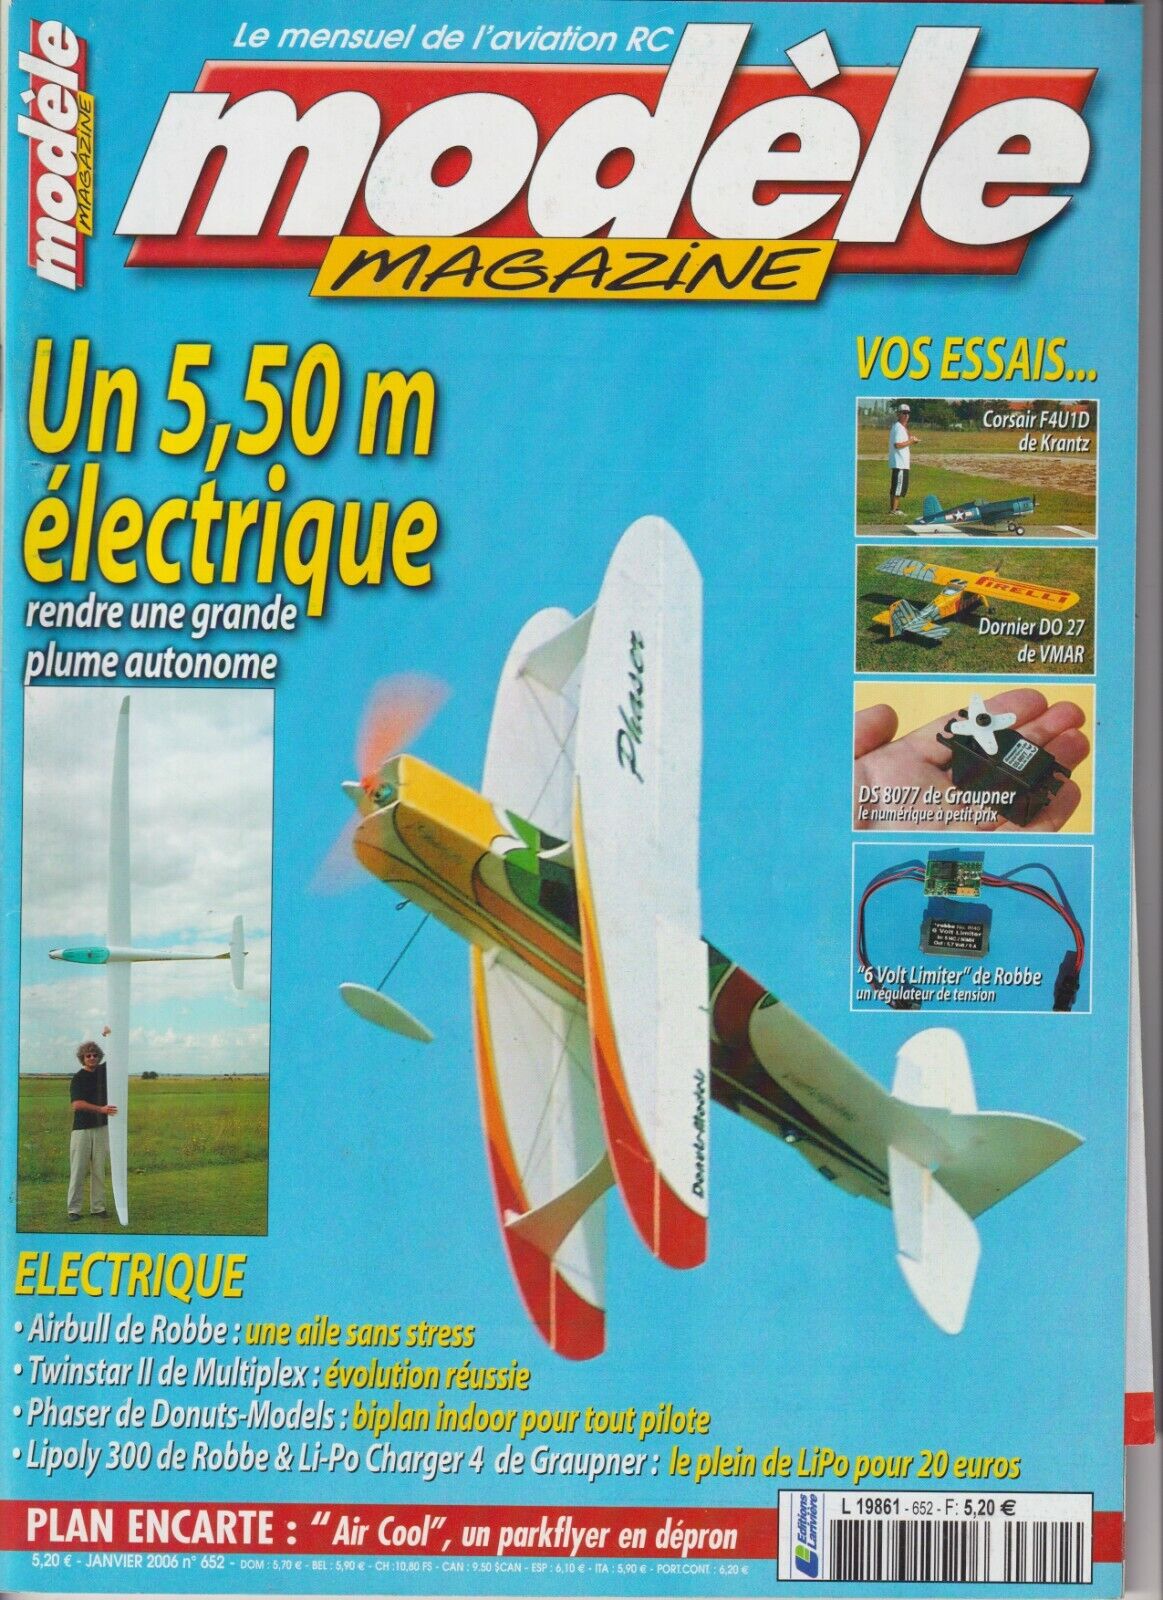 Modele mag no. 652 plan: air cool/airbull of robbe/multiplex twinstar II